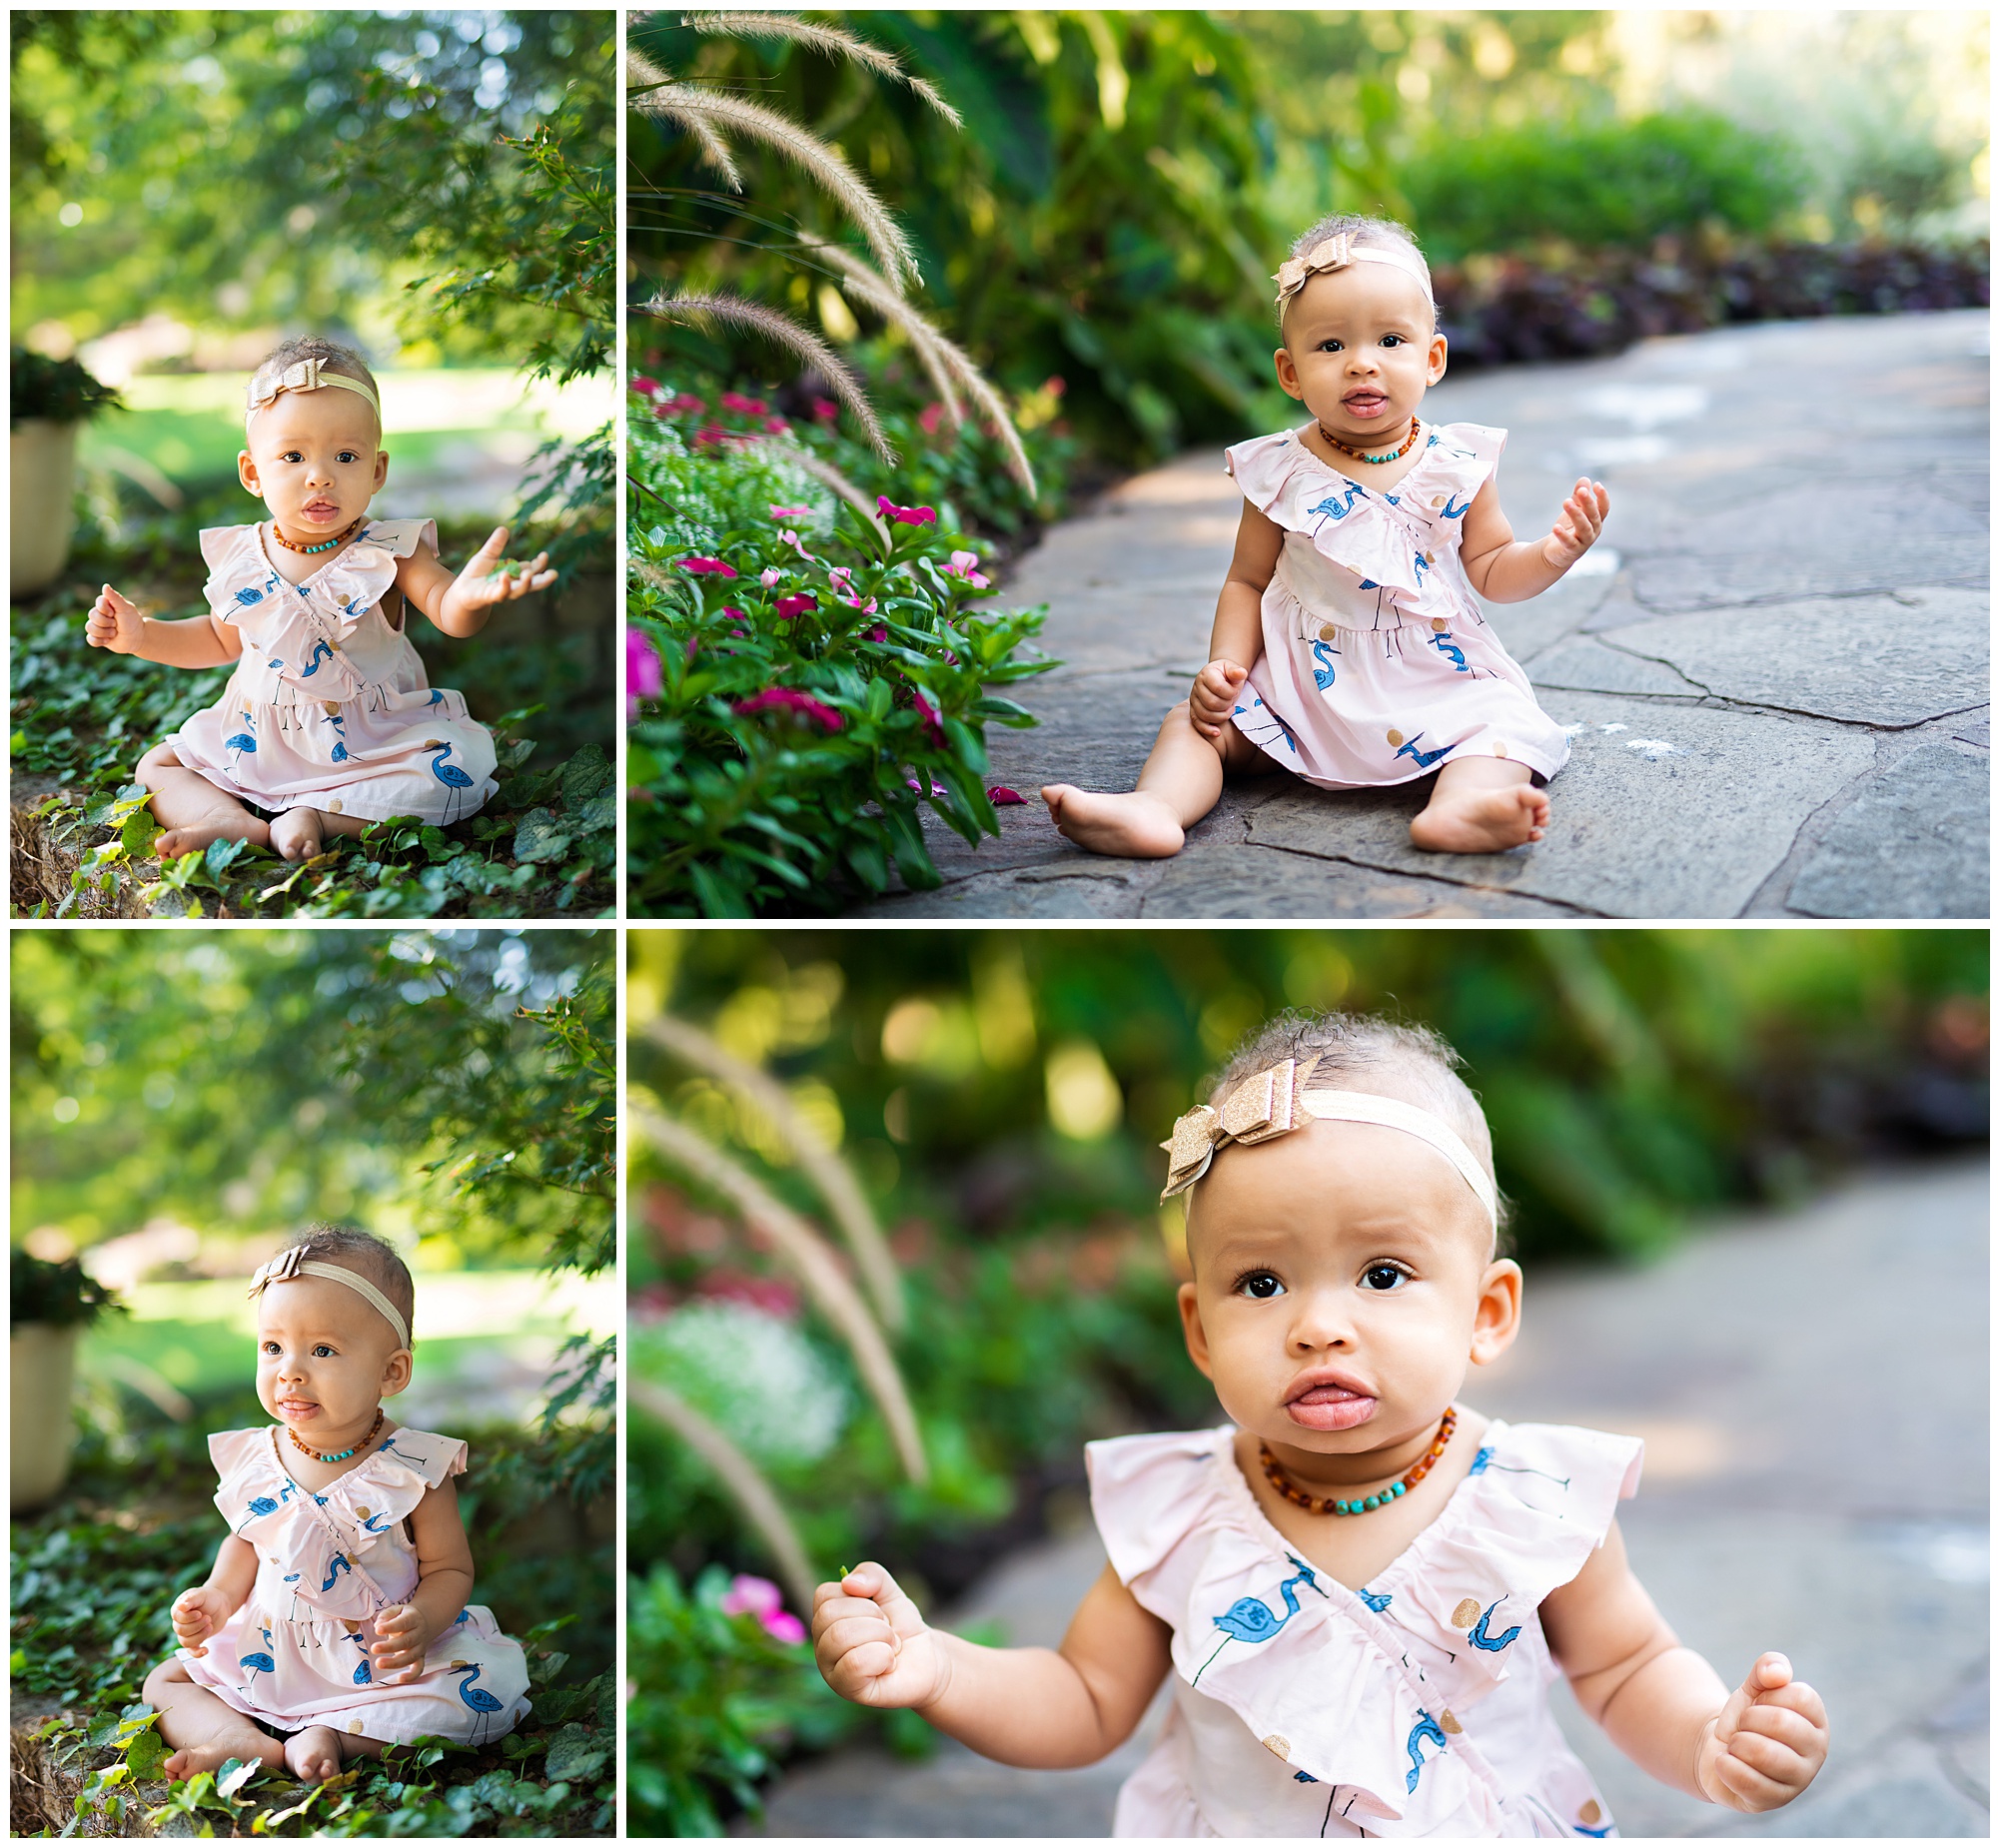 six month old during her photo session at the botanic gardens